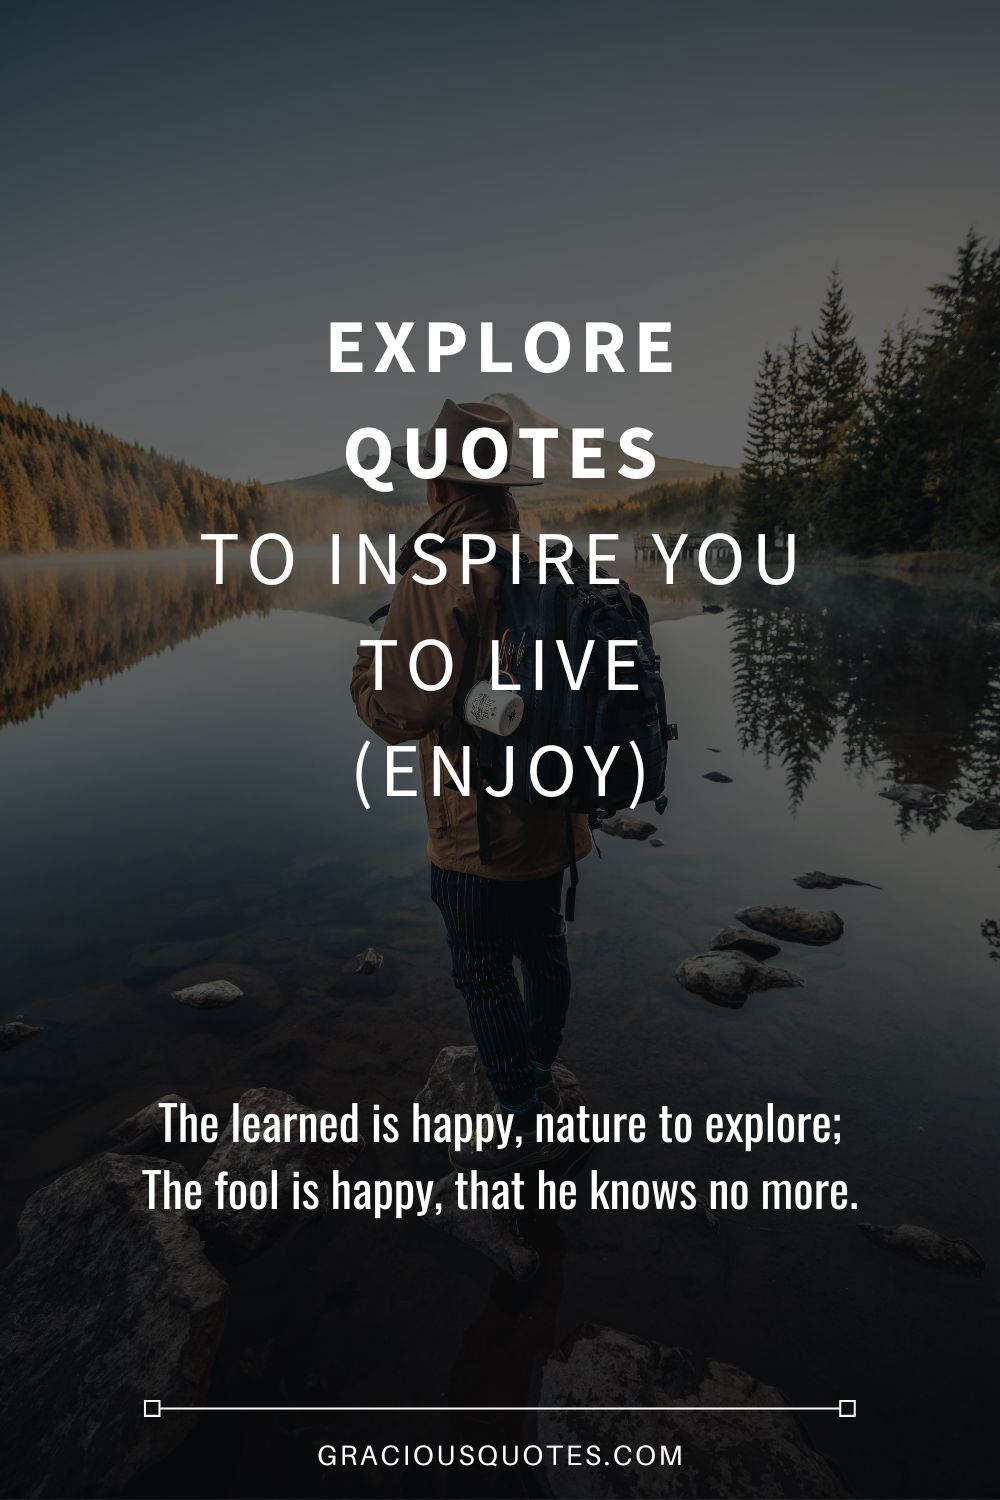 Explore Quotes to Inspire You to Live (ENJOY) - Gracious Quotes